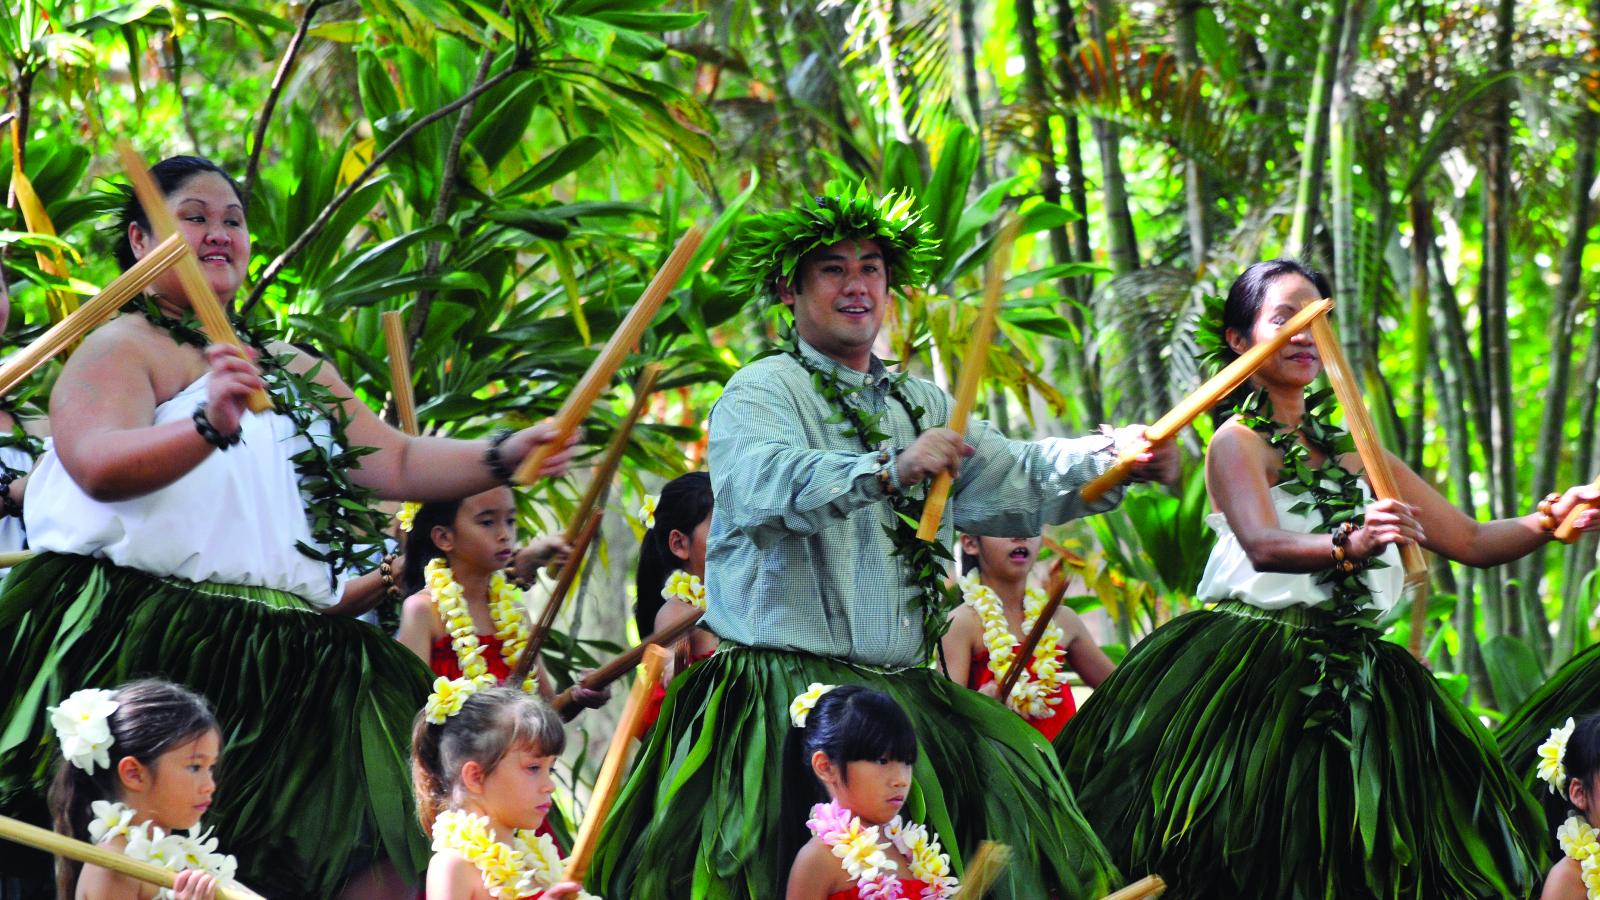 Dancers wearing grass skirts and floral wreaths holding bamboo sticks perform a traditional Hawaiian dance. 